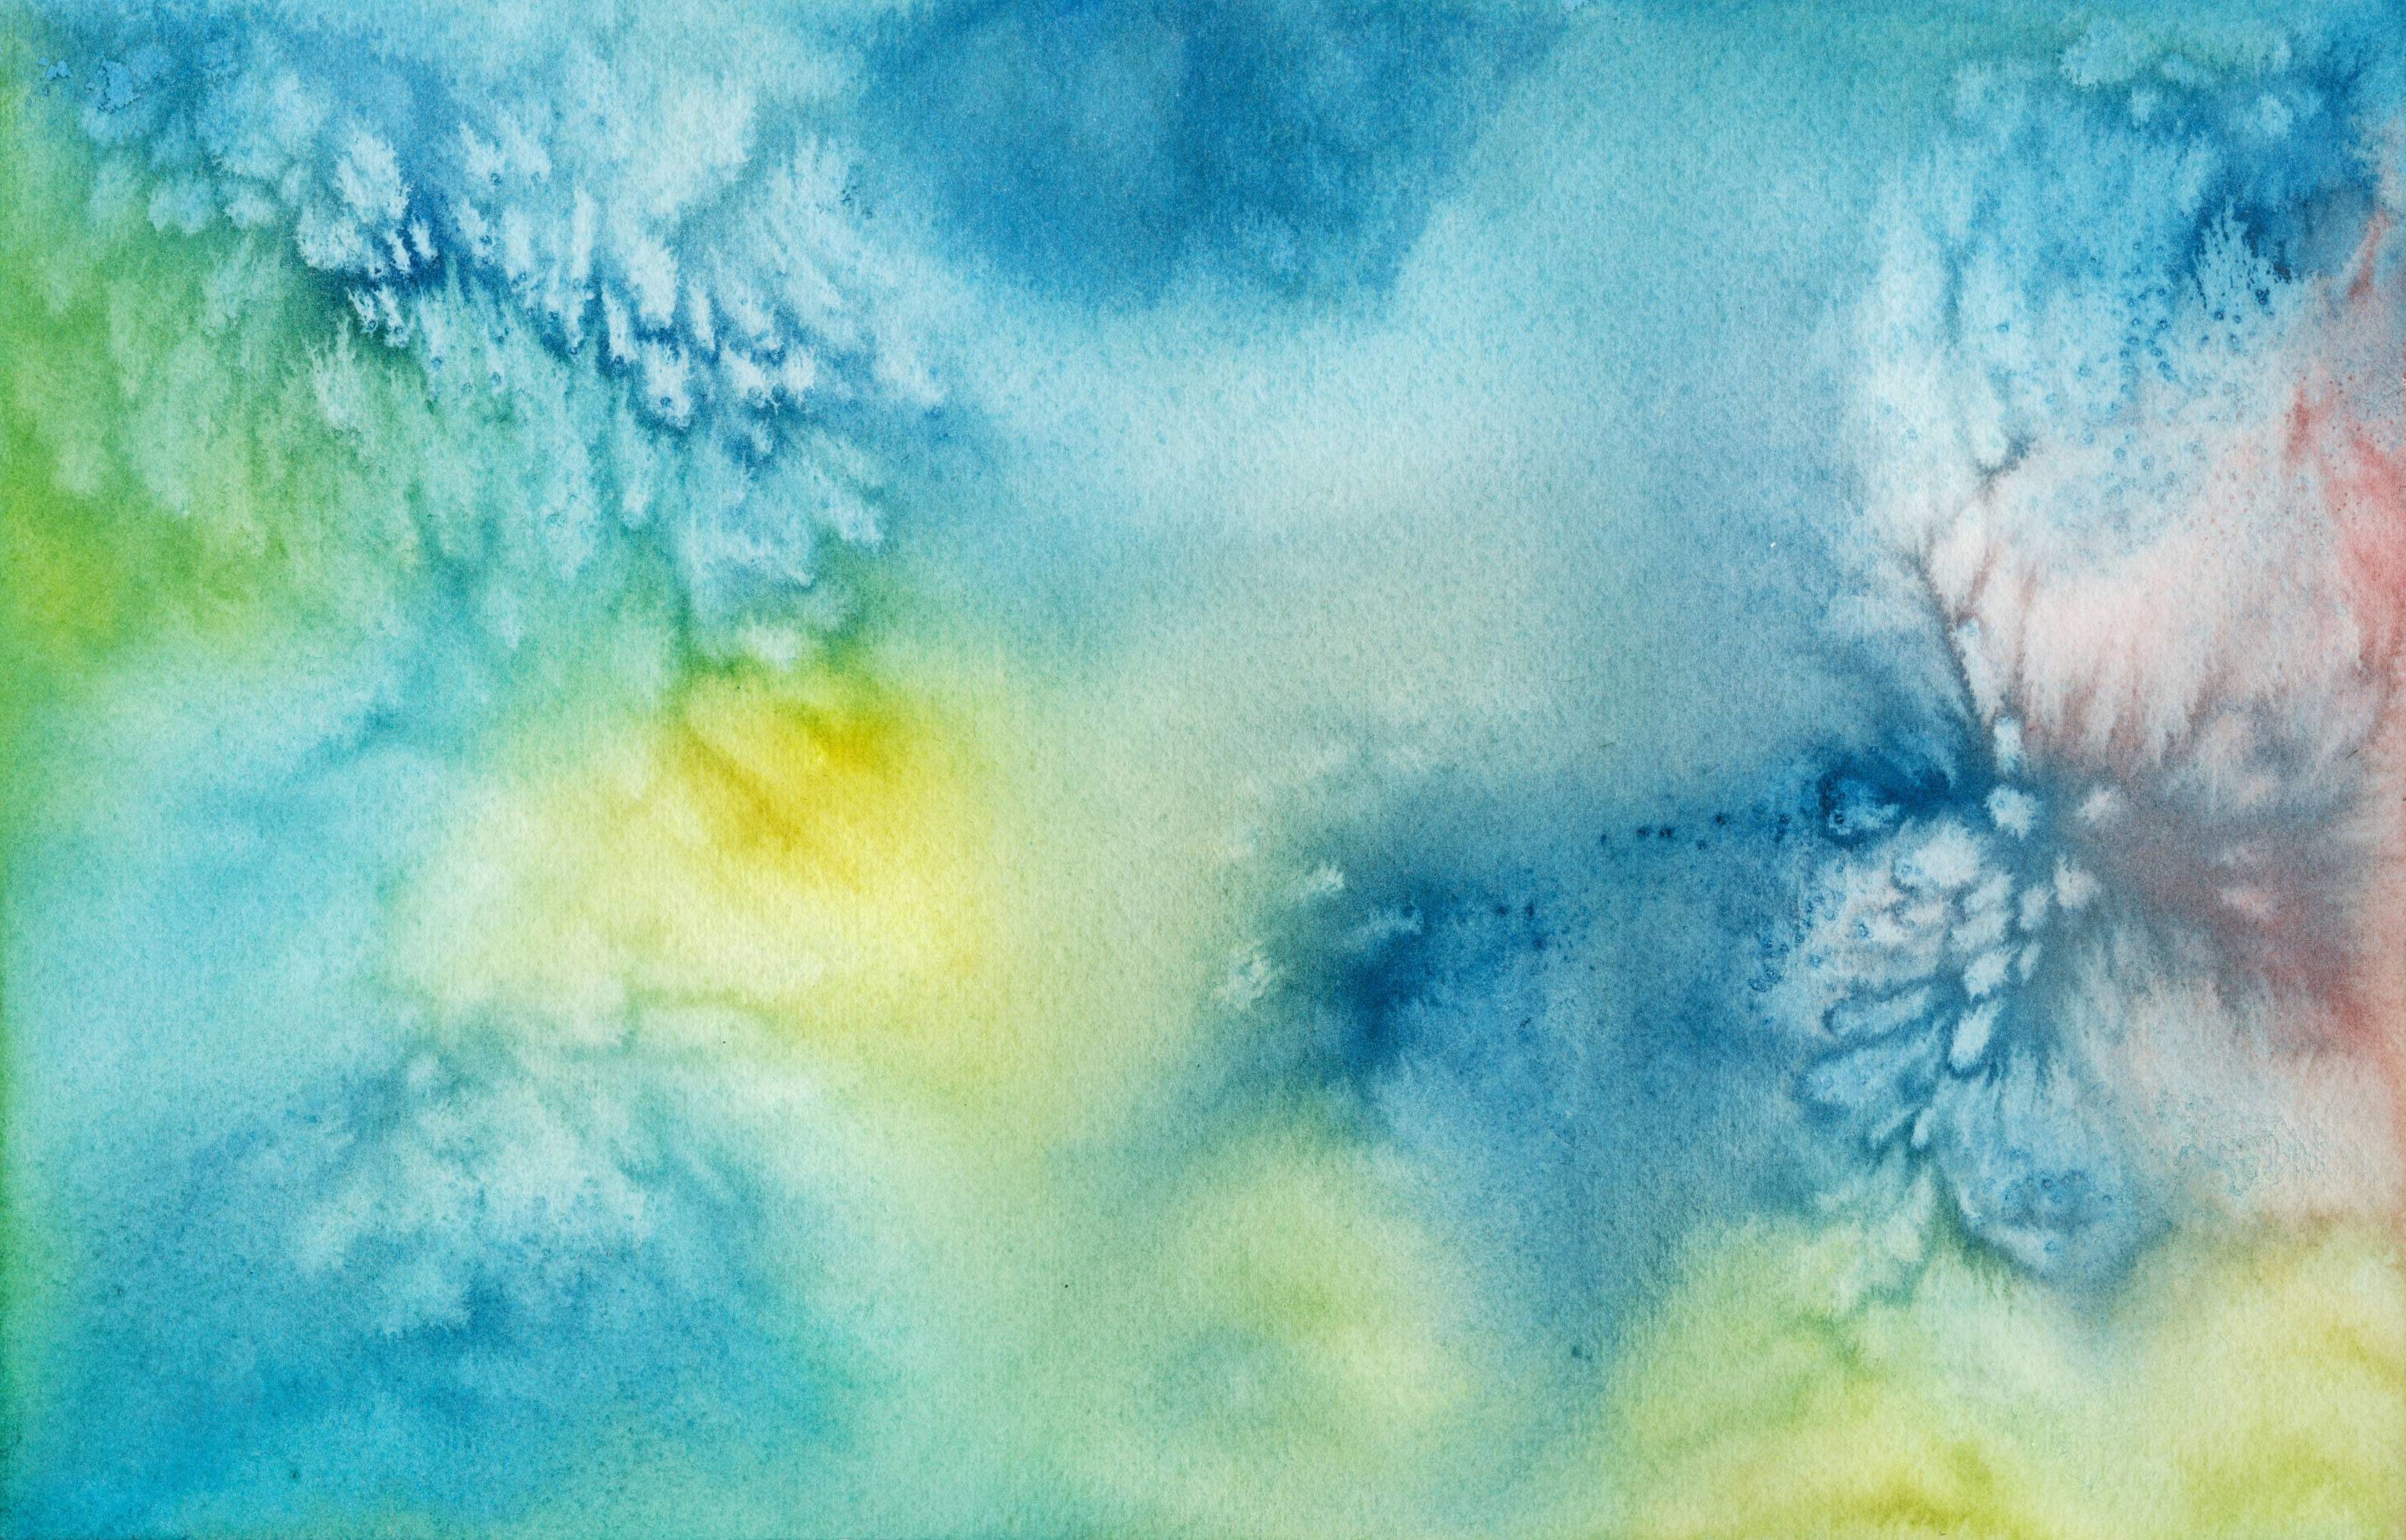 3168x2028 Watercolor Texture Stock 1 by ekoh-stock on DeviantArt